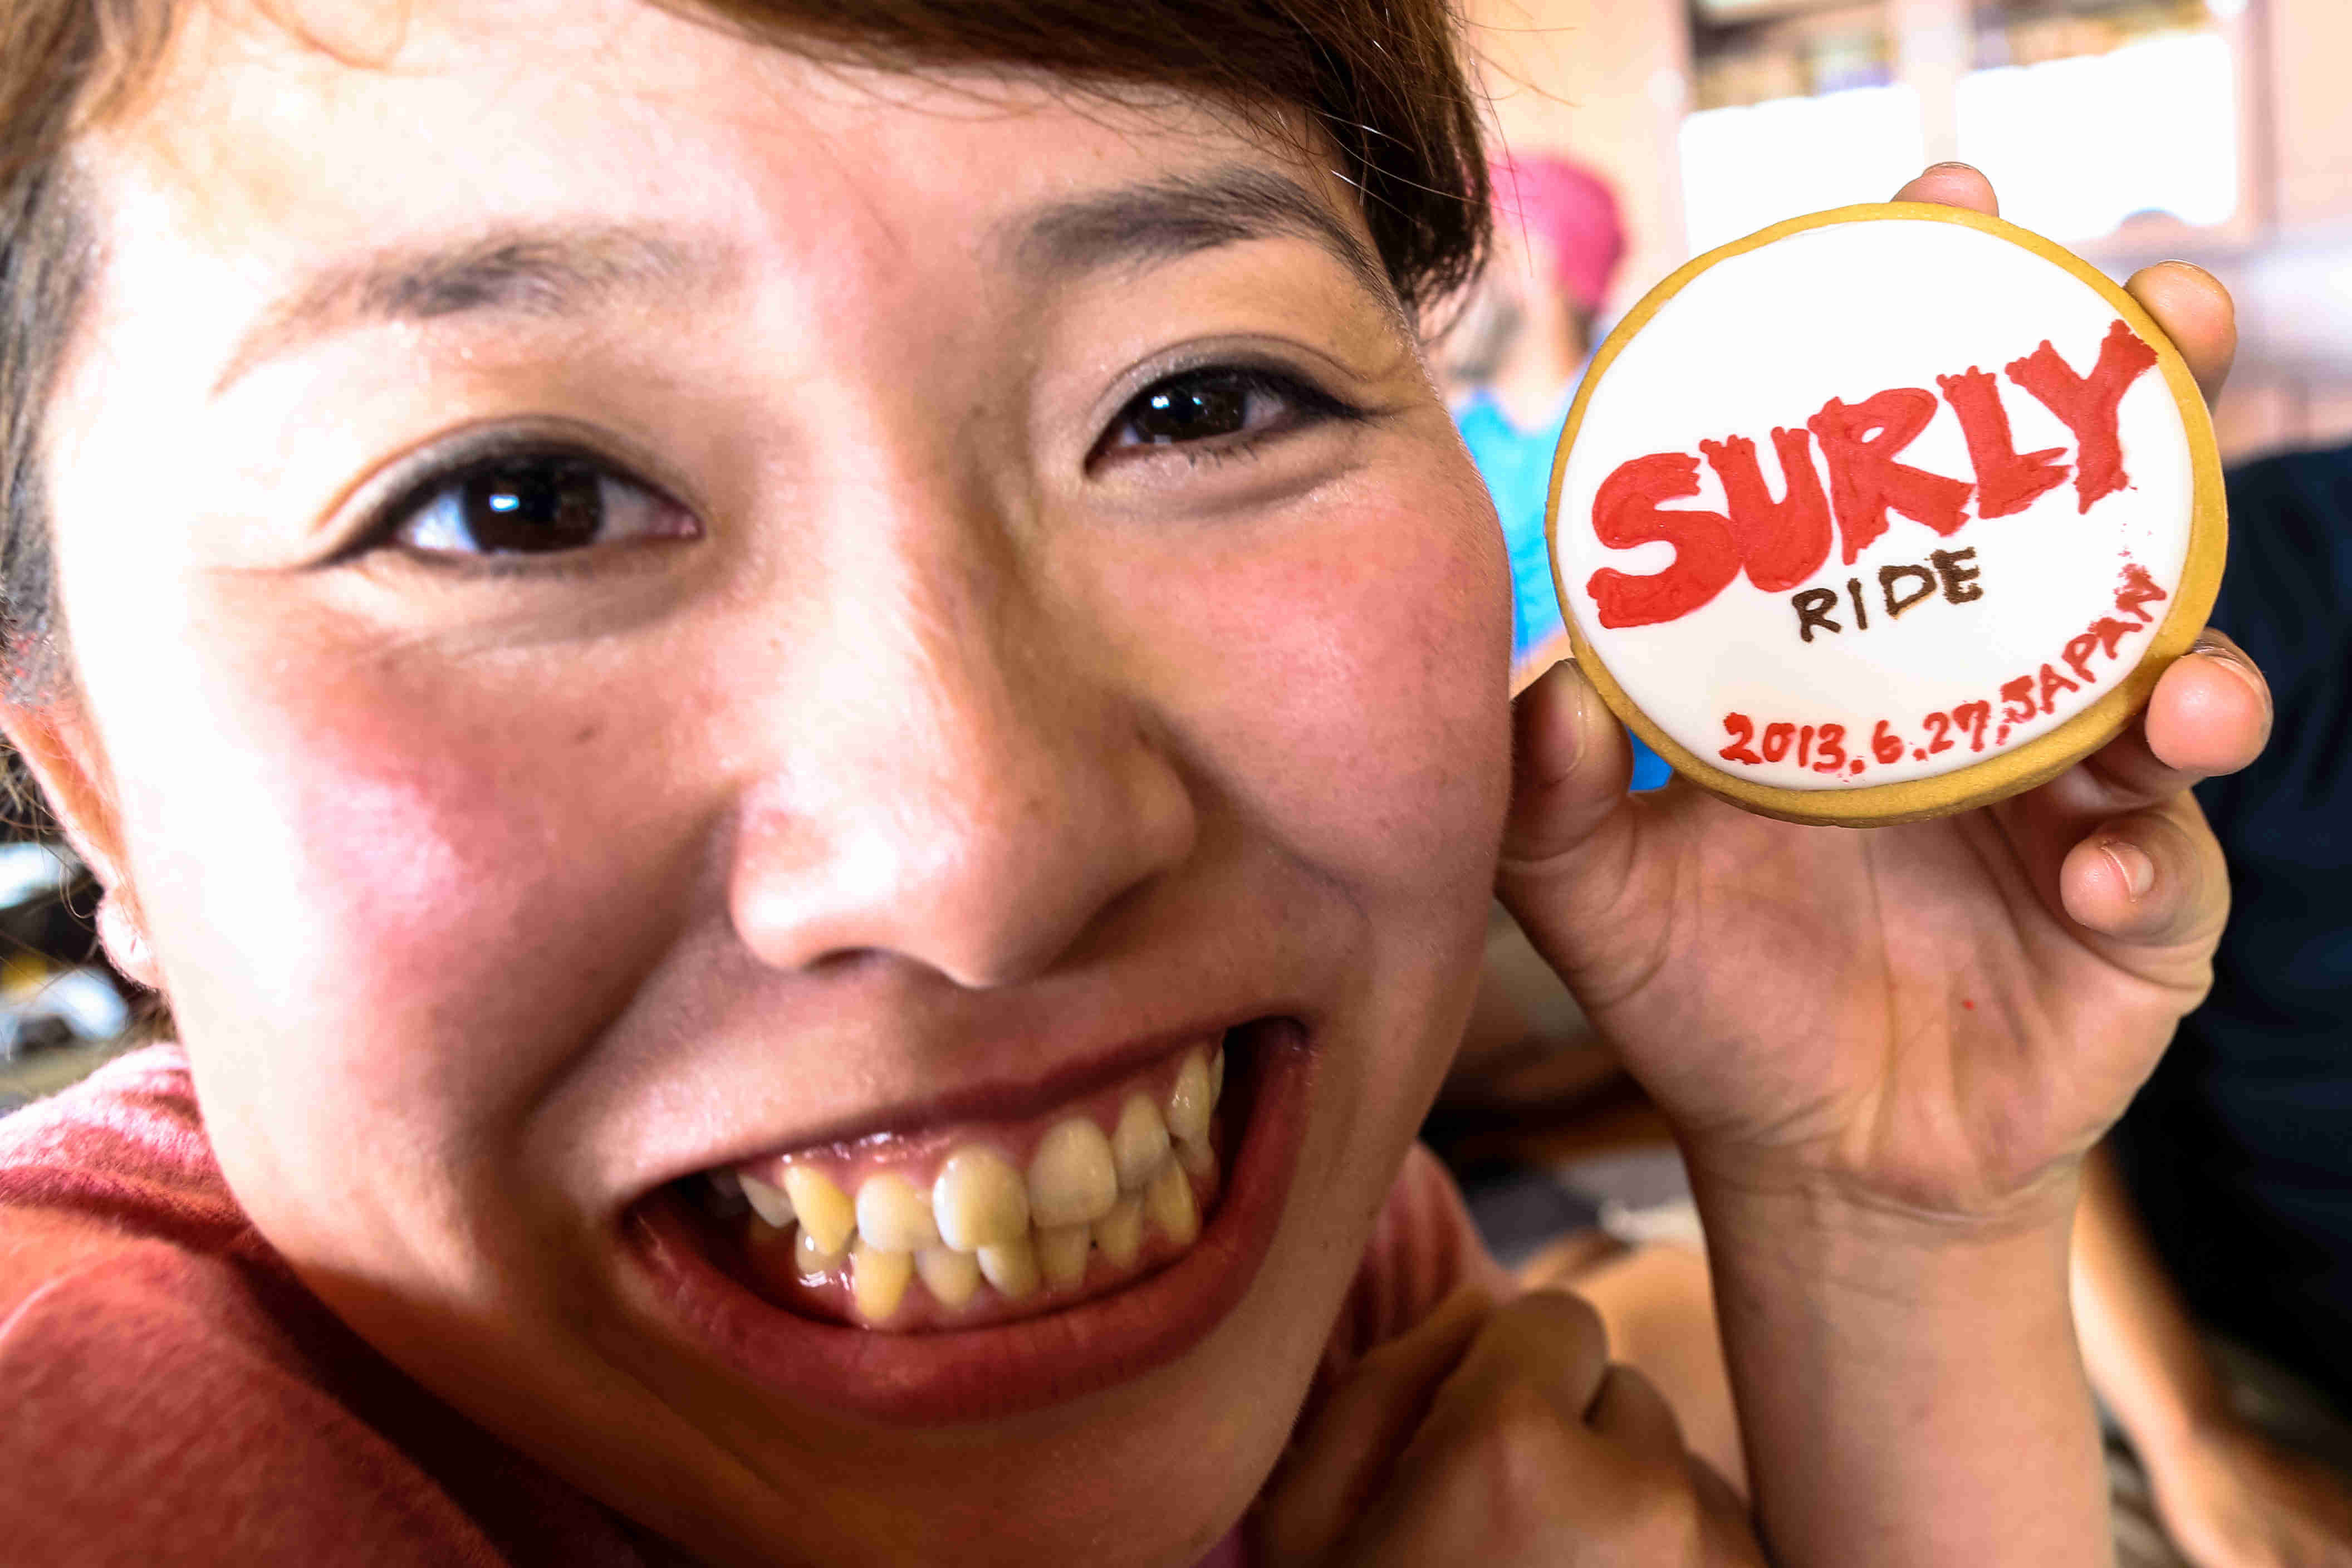 Headshot of a smiling person, holding up a cookie with, Surly Ride - 2013.6.27, Japan, decorated on it, near their face